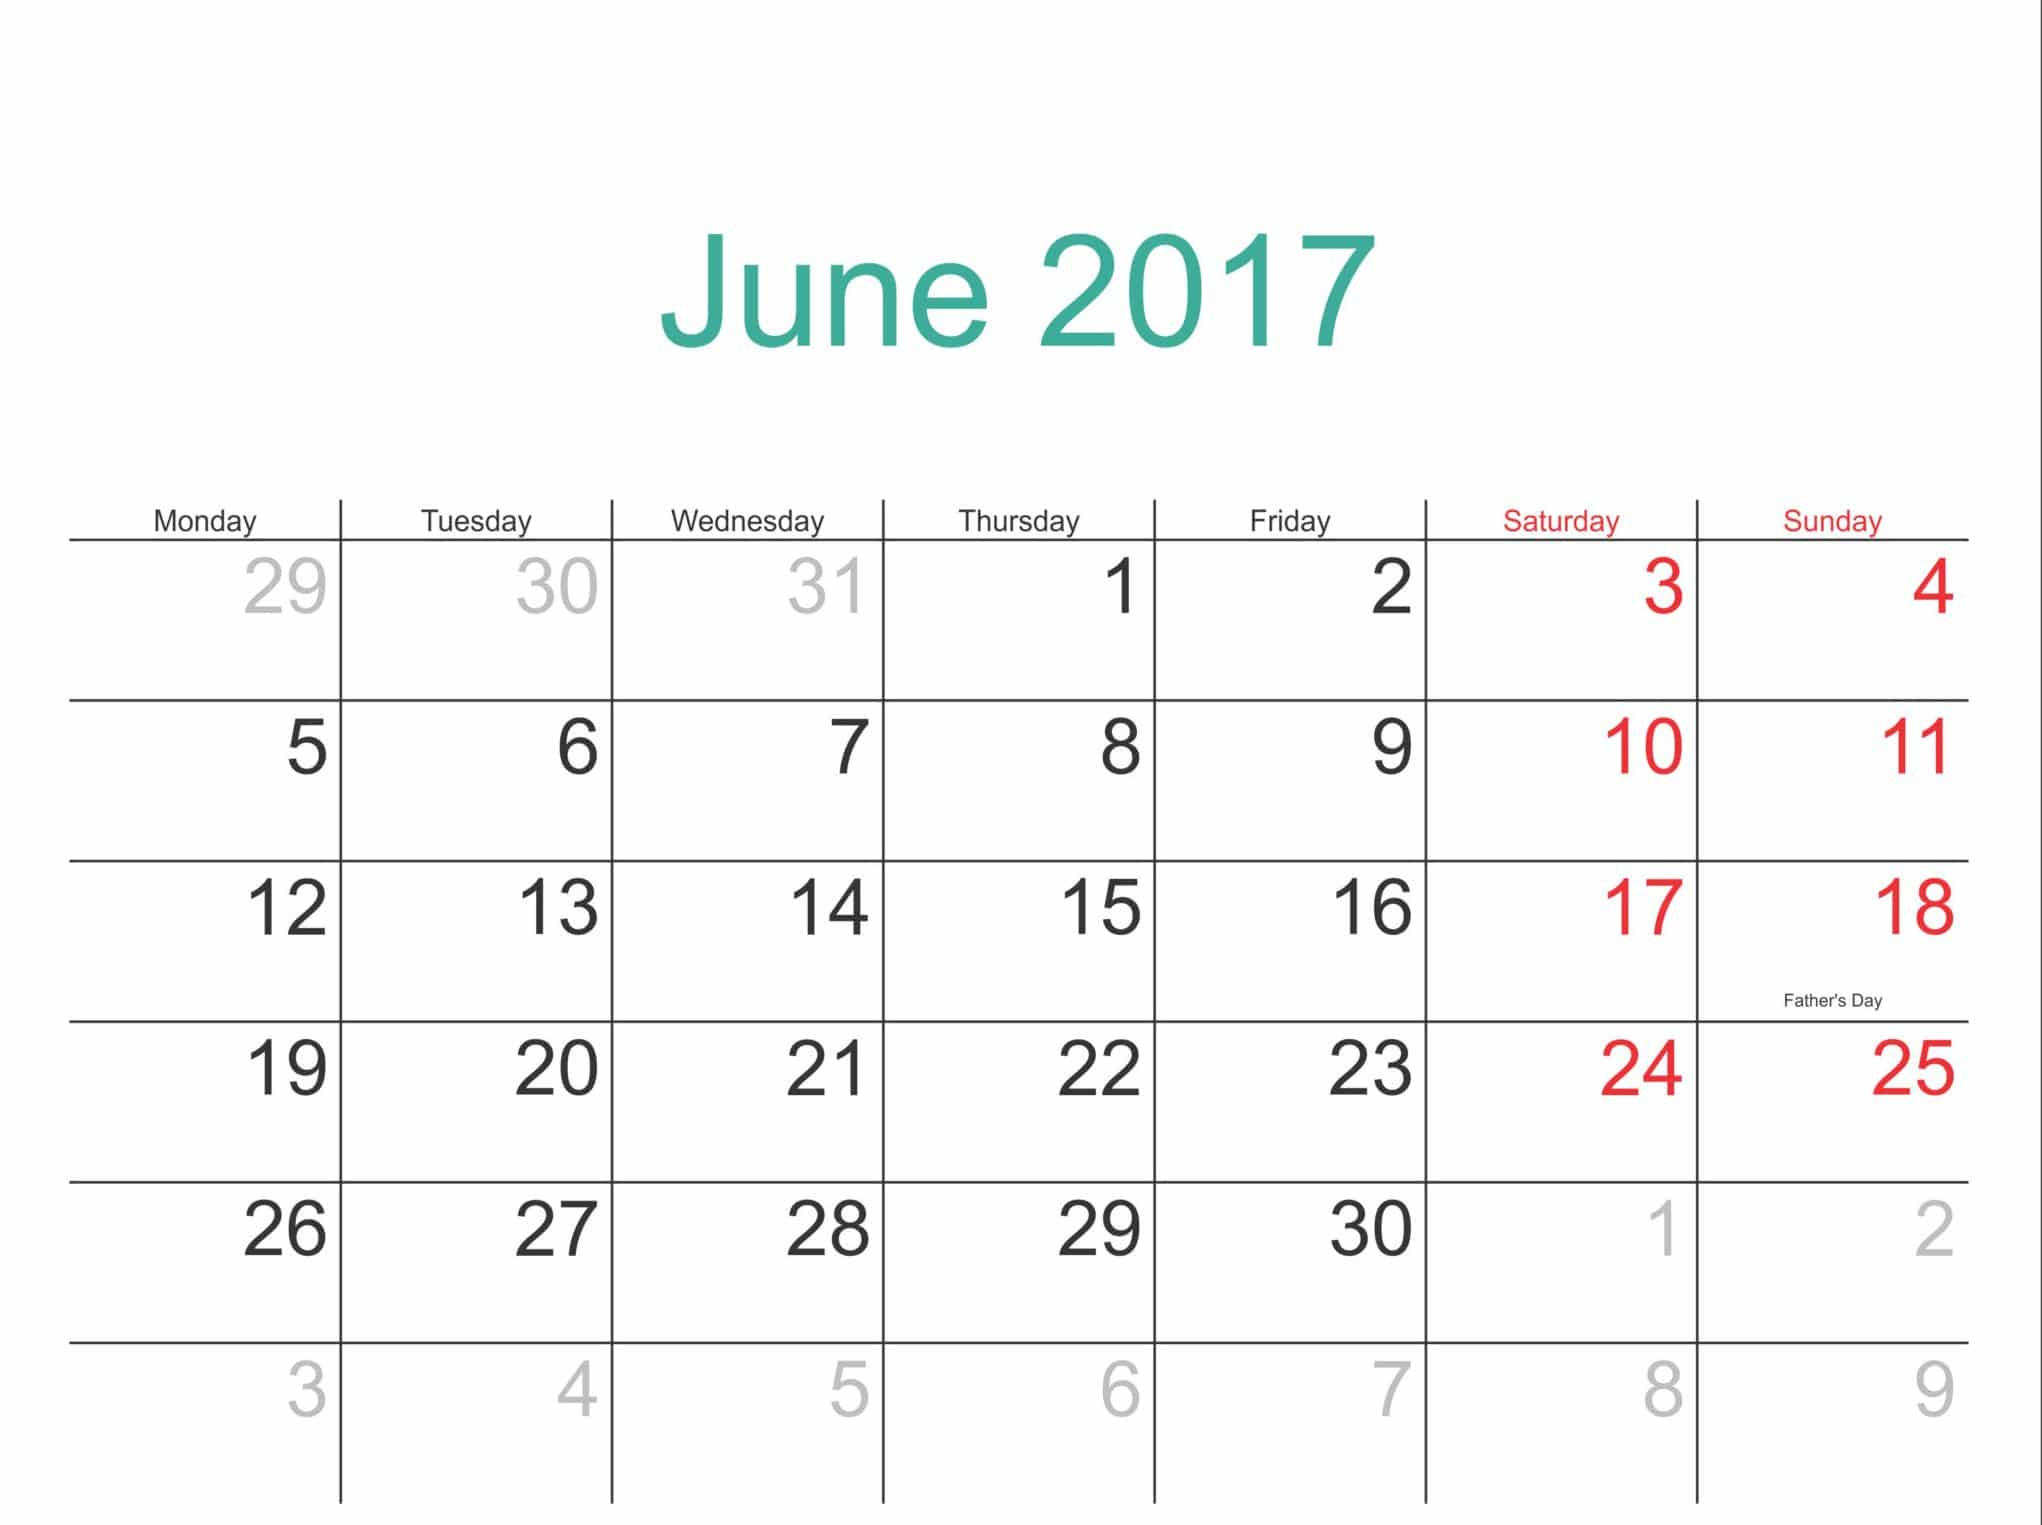 Welcome June 2017 Images